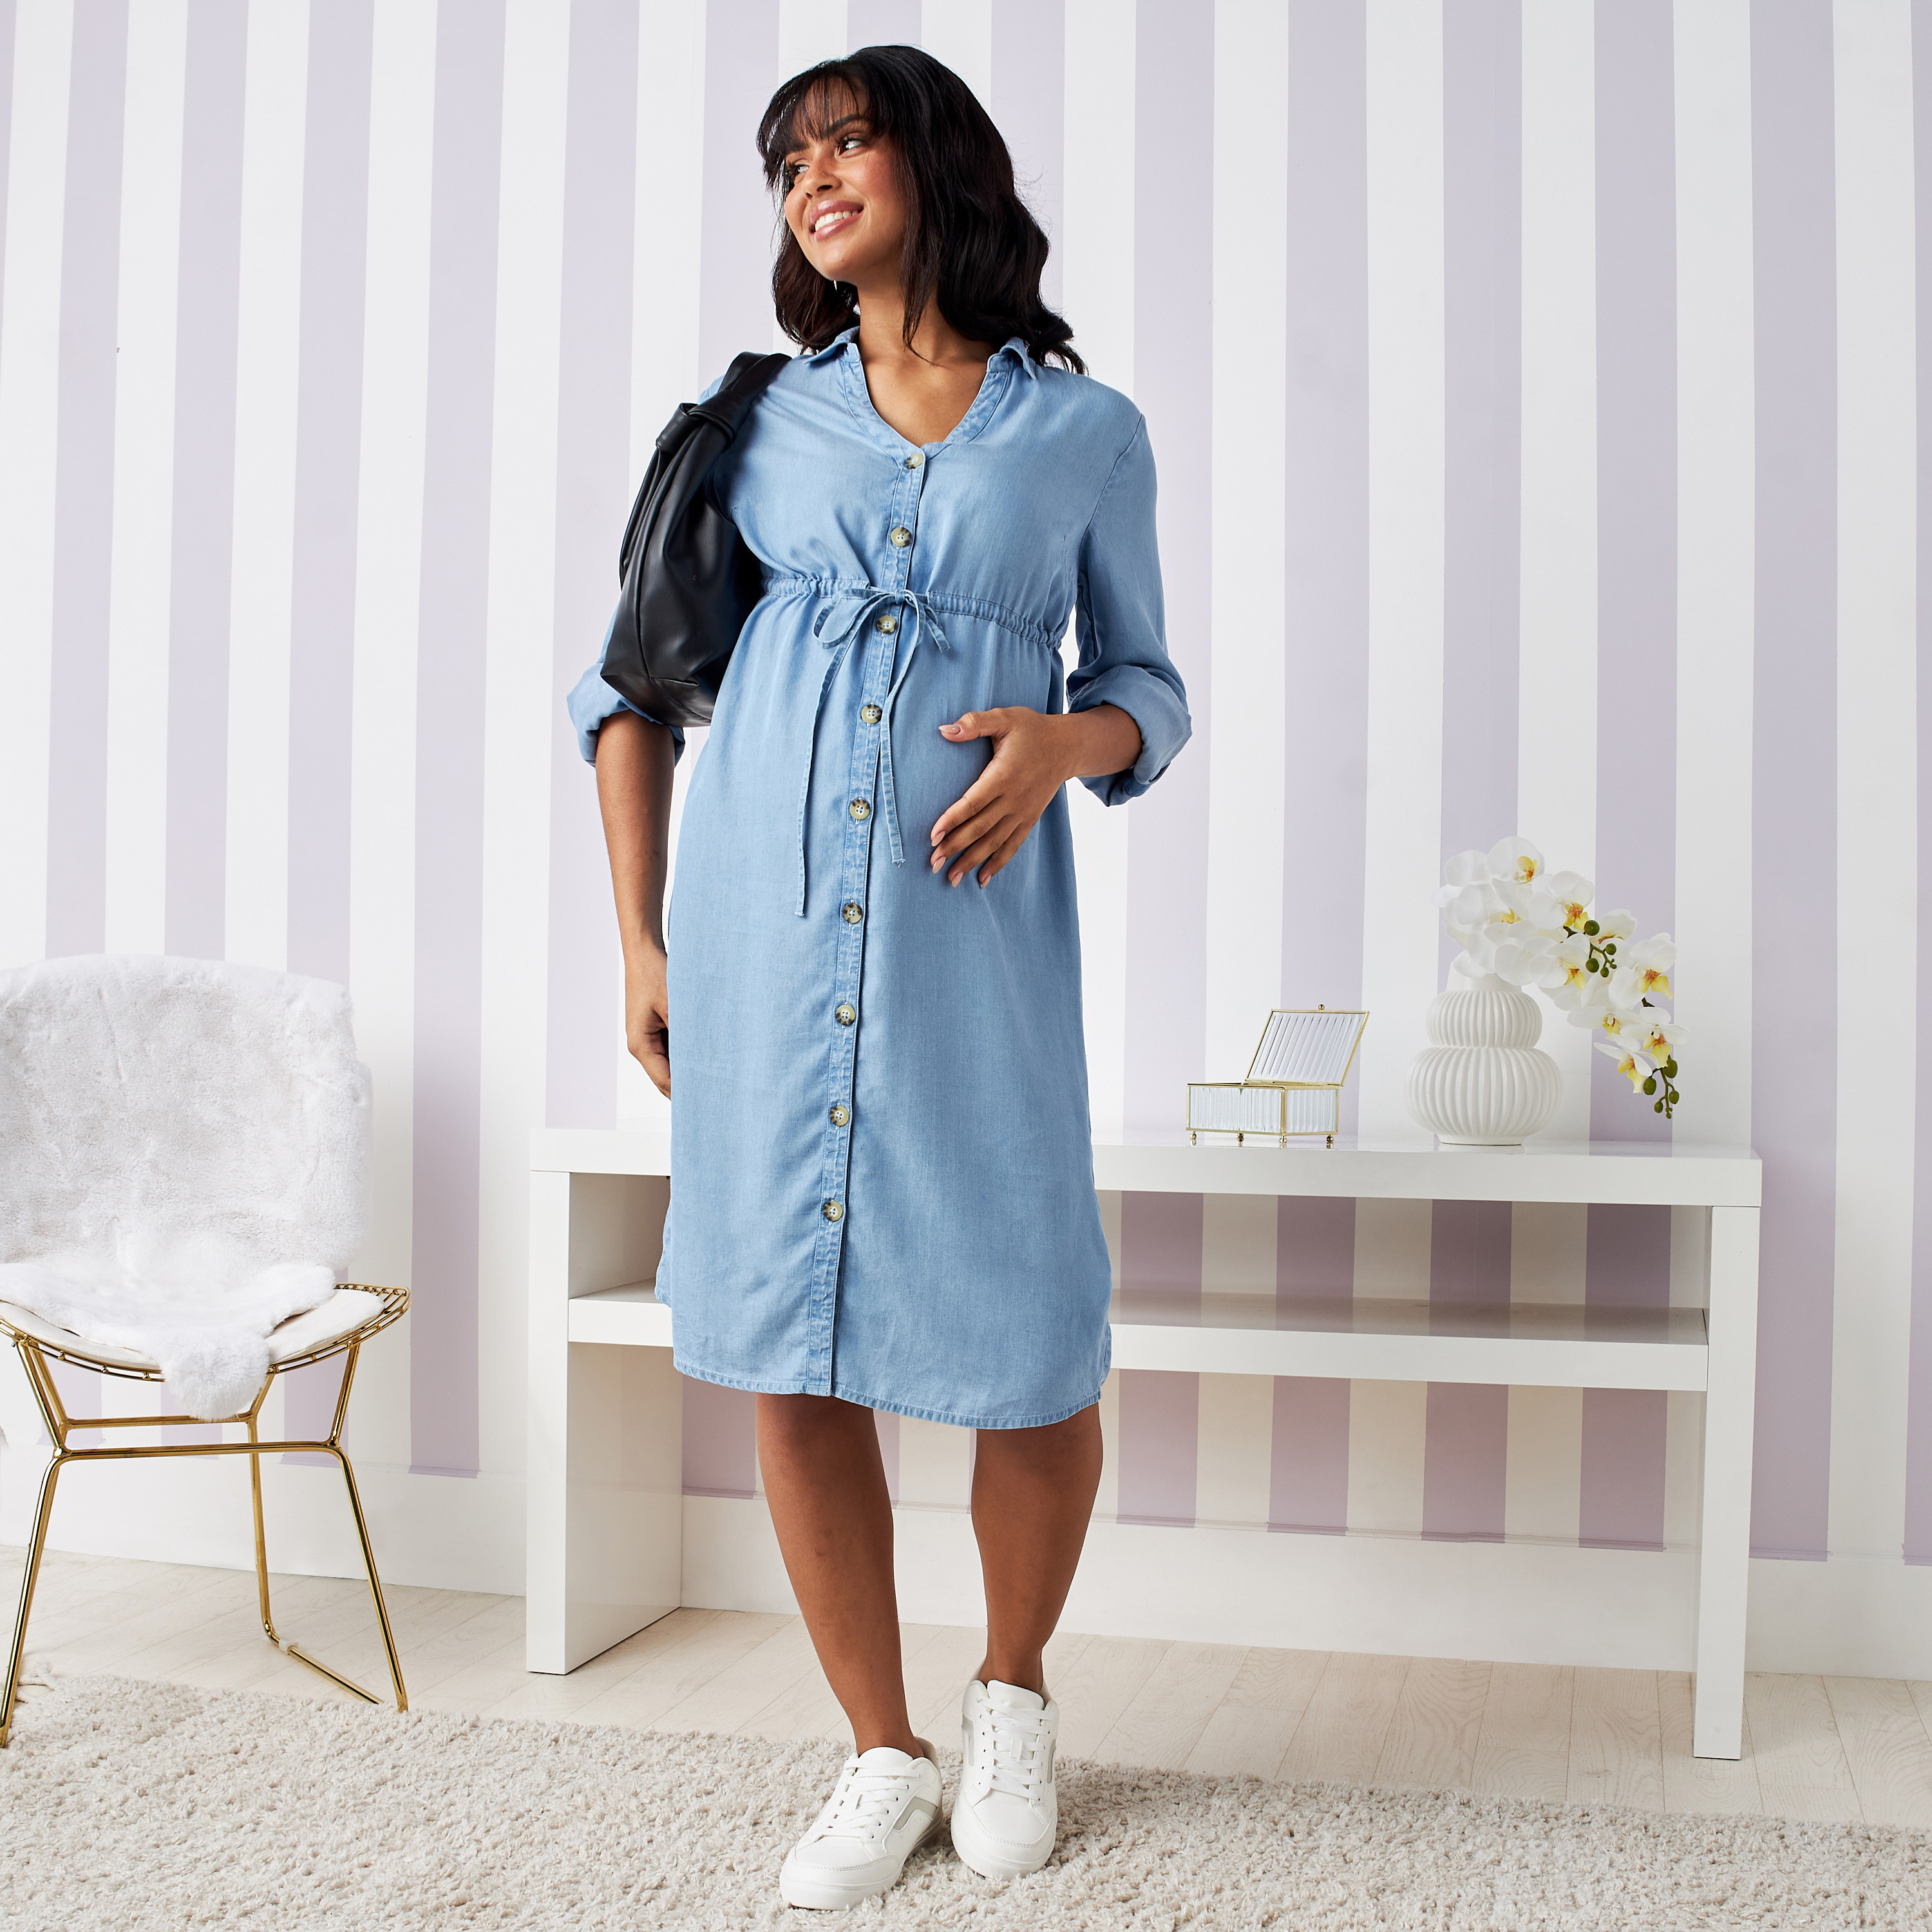 KOI SLEEPWEAR Three Fourth Sleeves Solid Denim Maternity Nursing Dress Blue  Online in India, Buy at Best Price from Firstcry.com - 11831716